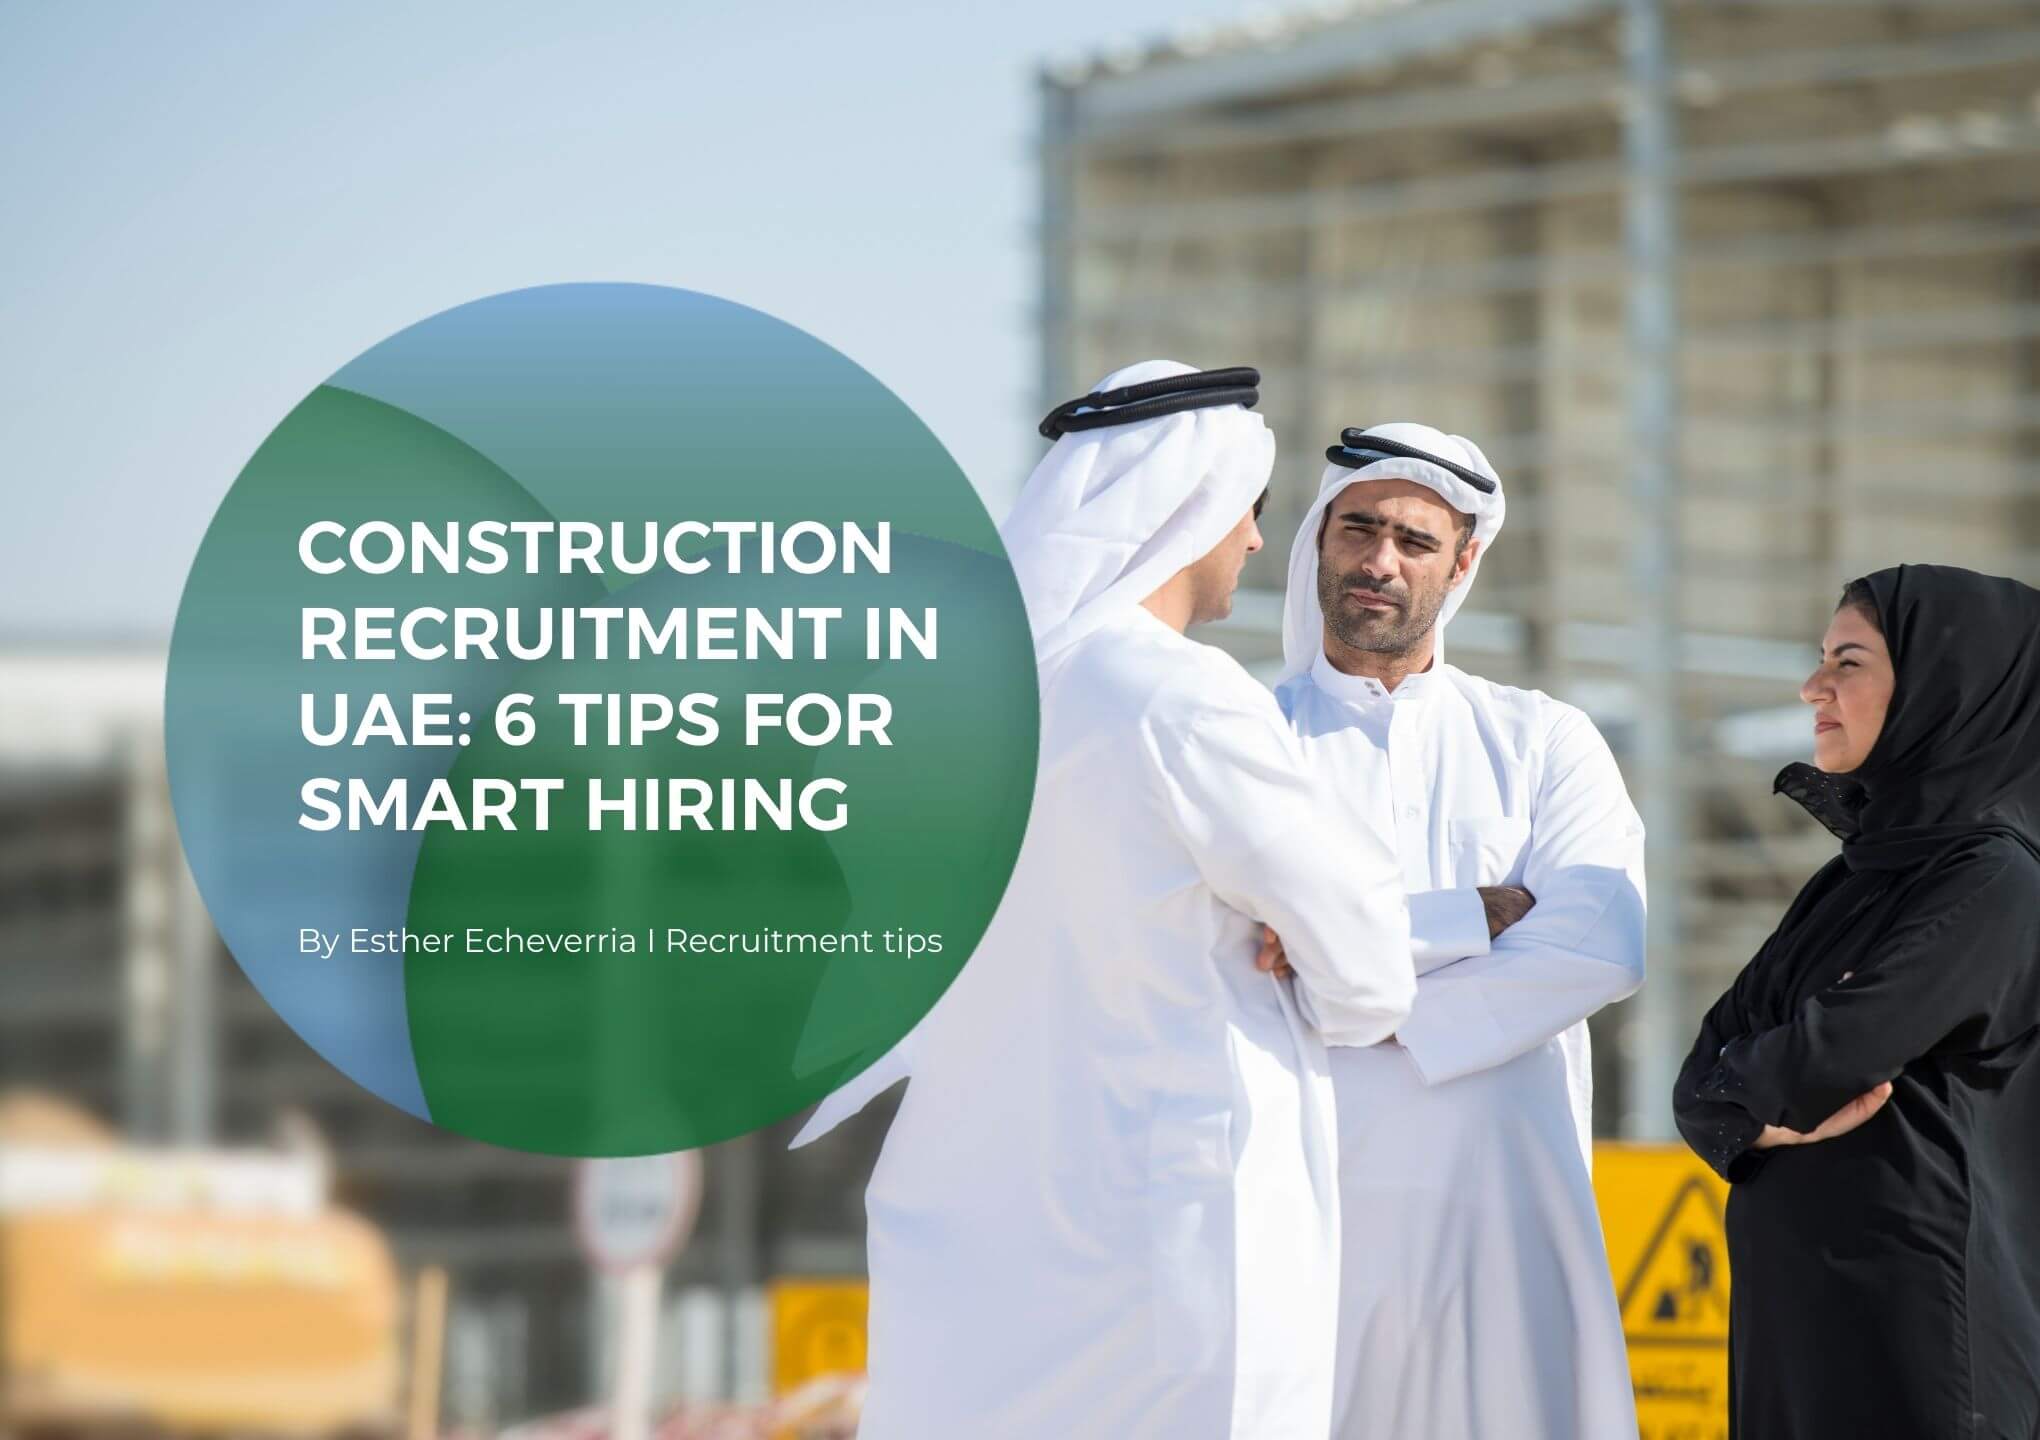 Construction recruitment in UAE: 5 tips for smart hiring